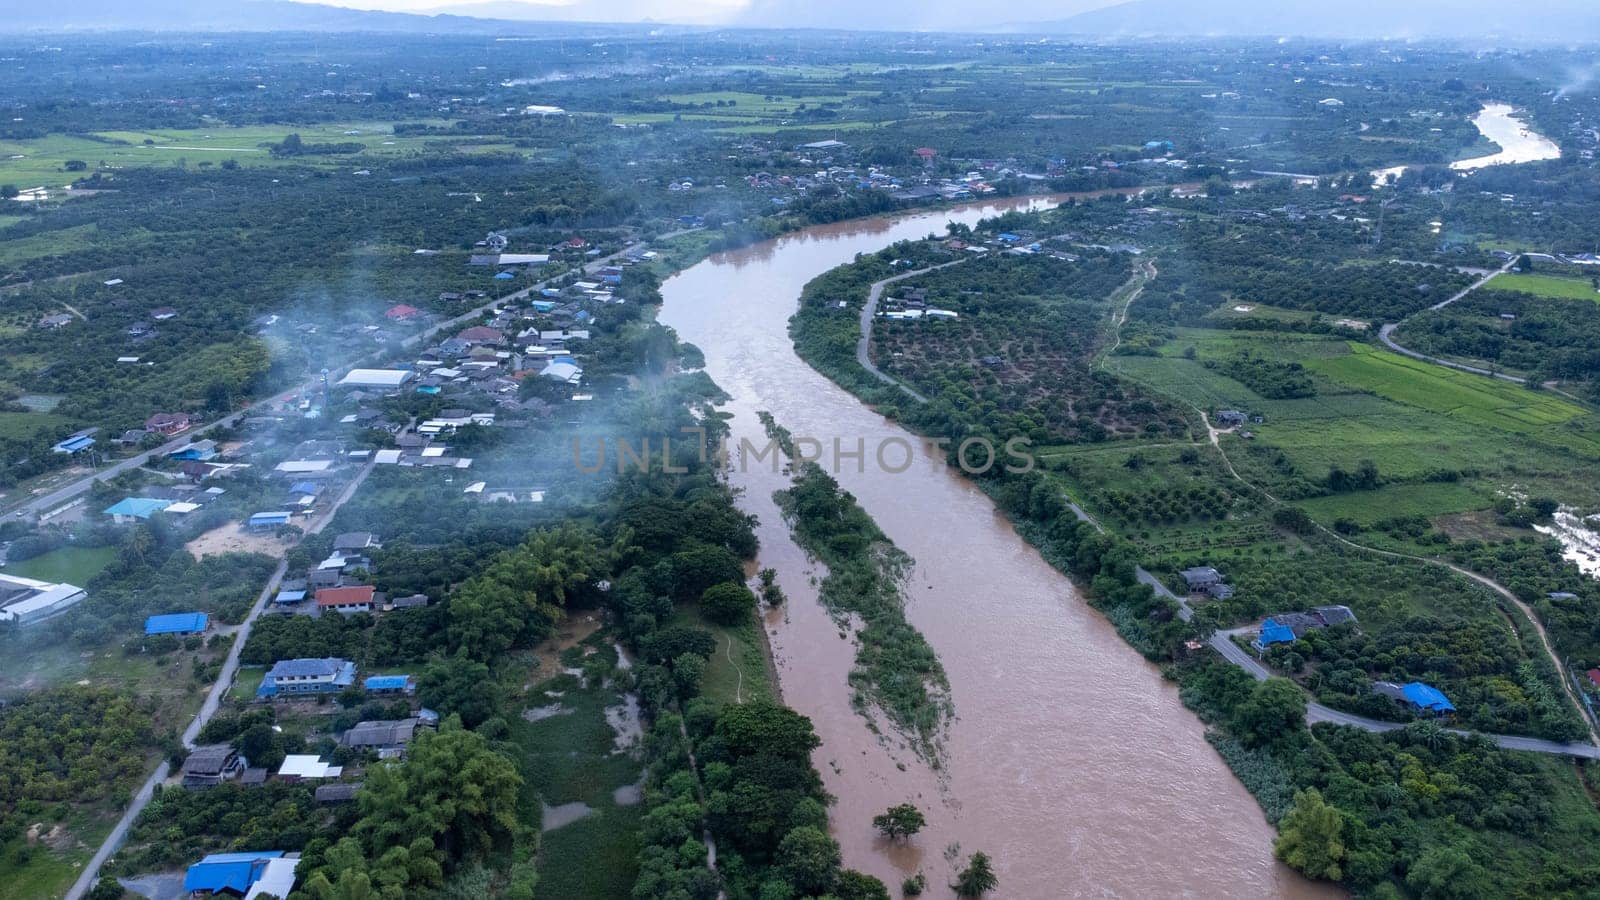 Aerial view of the Ping River across rice fields and rural villages during sunset. Views of Chiang Mai villages and the Ping River from a drone. by TEERASAK